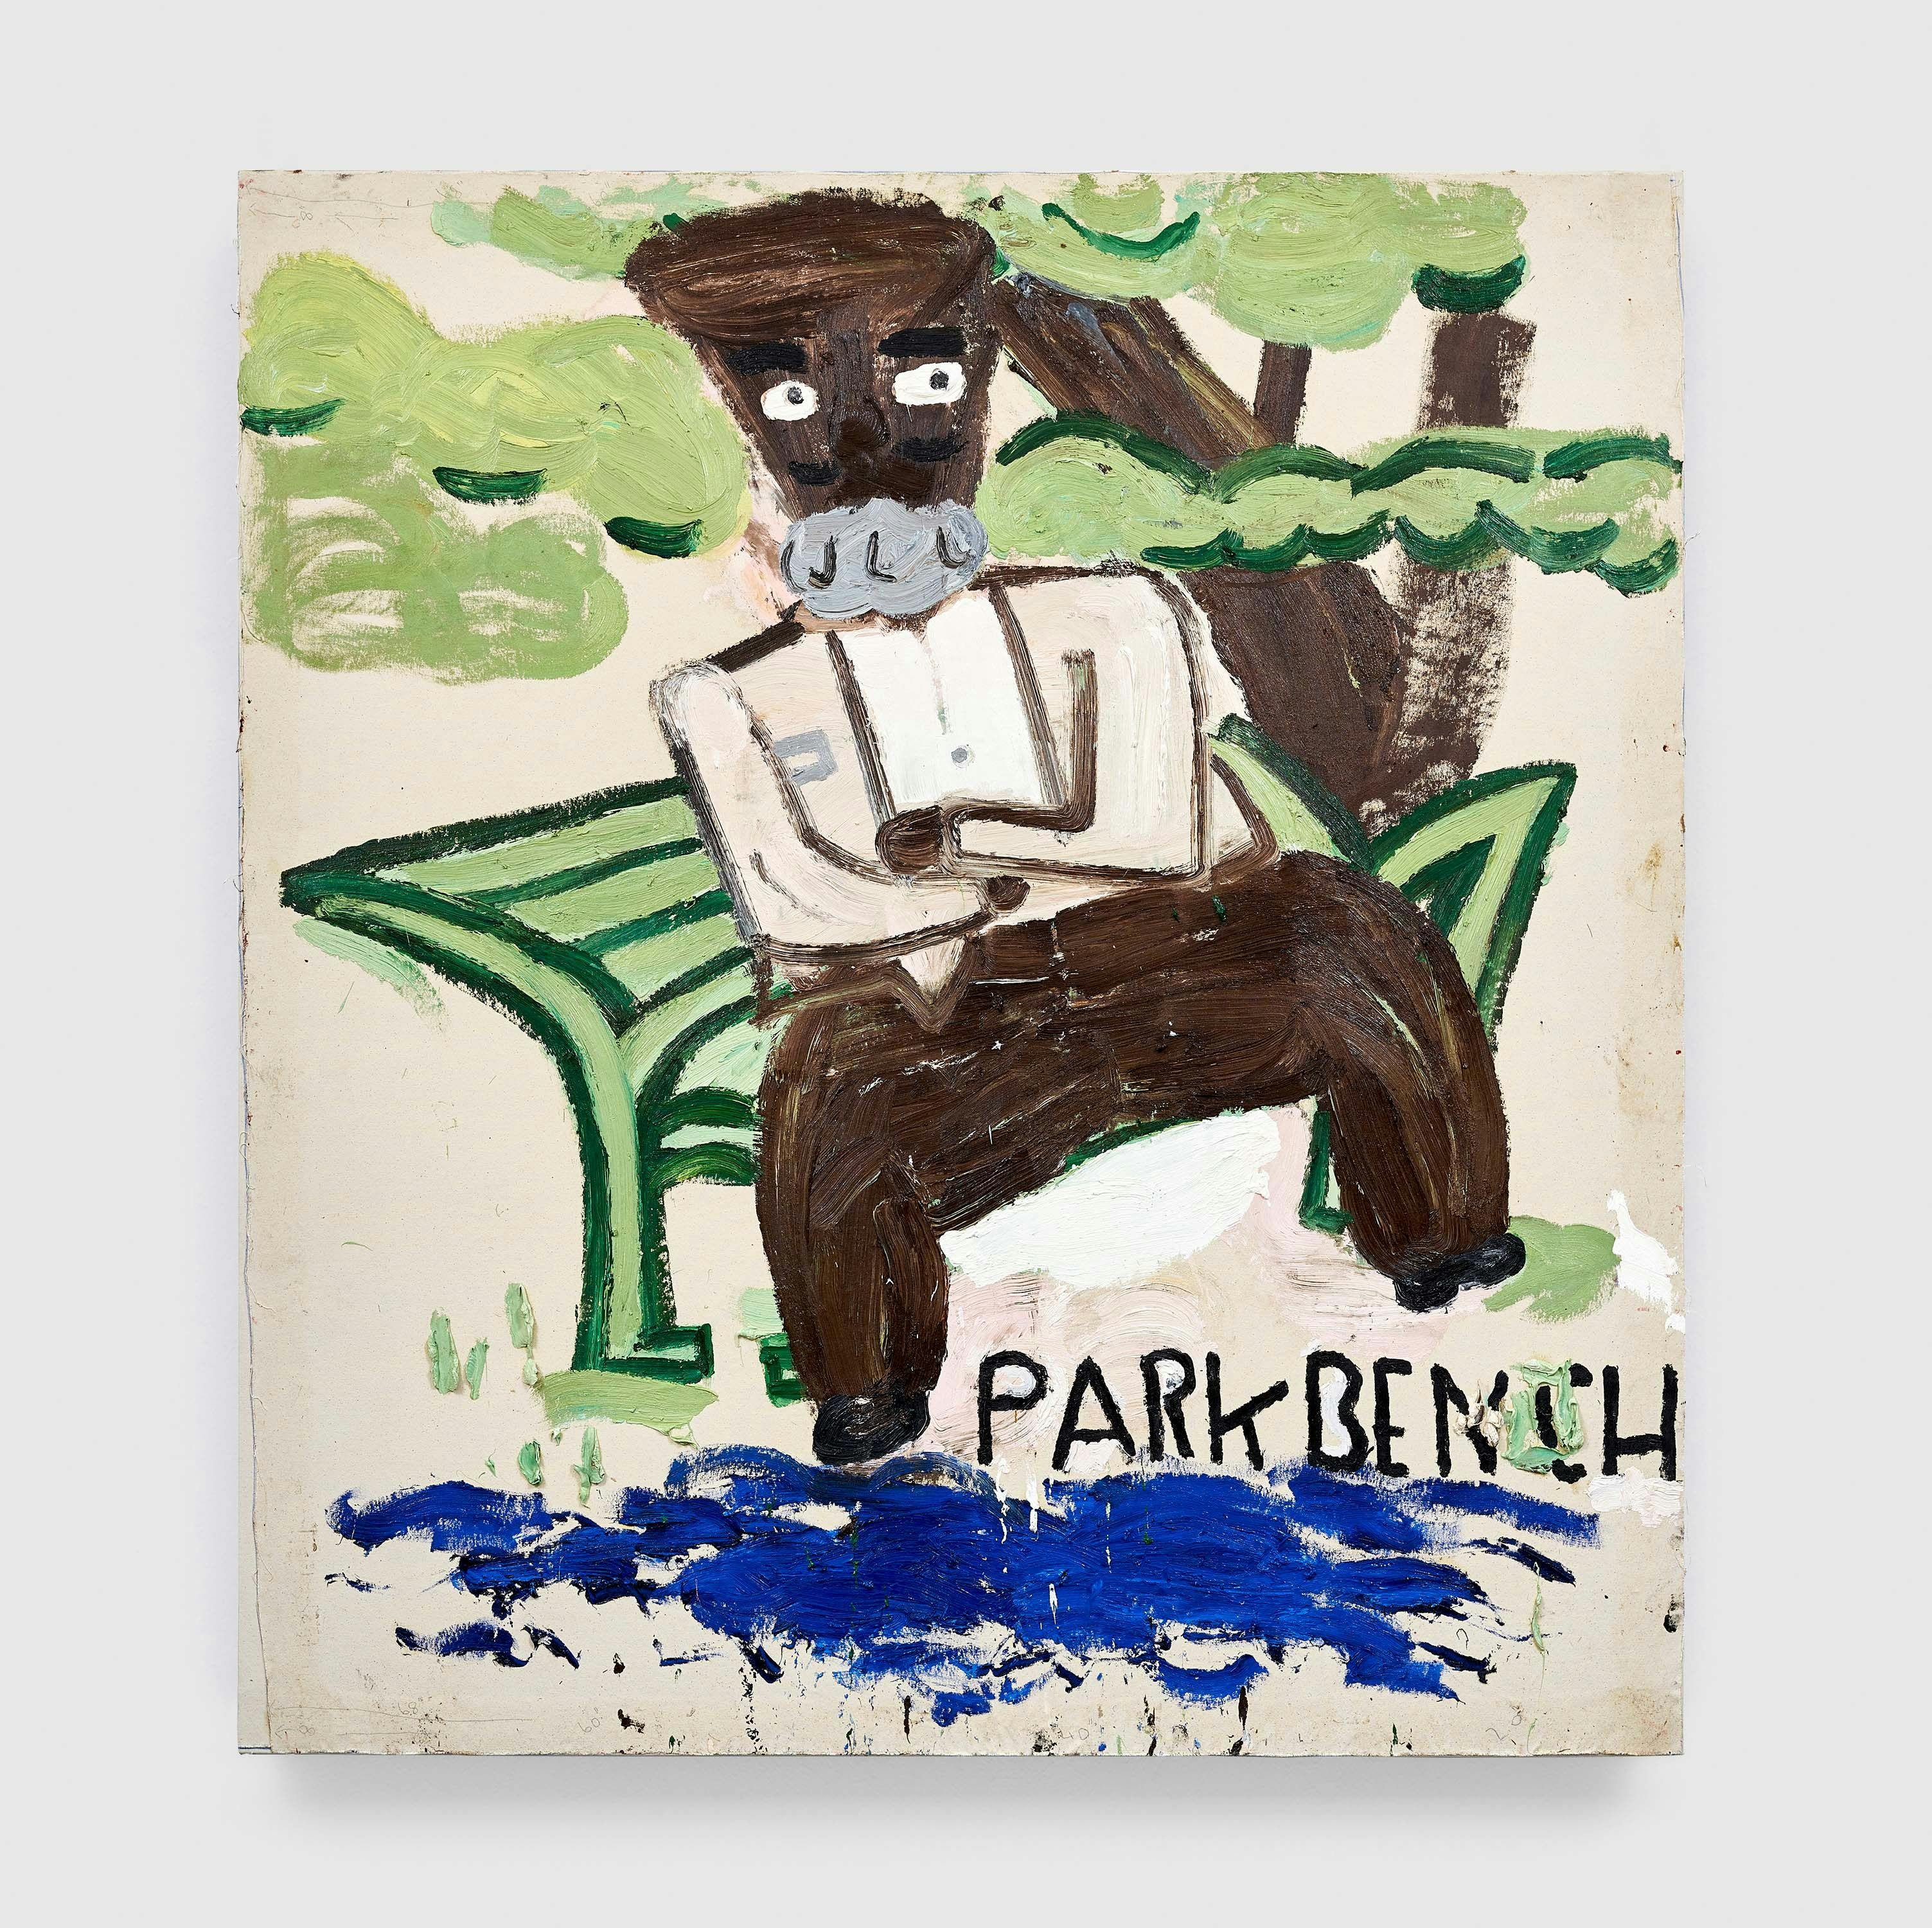 A painting by Rose Wylie, titled Park Bench, (The Migrant), dated 2017.